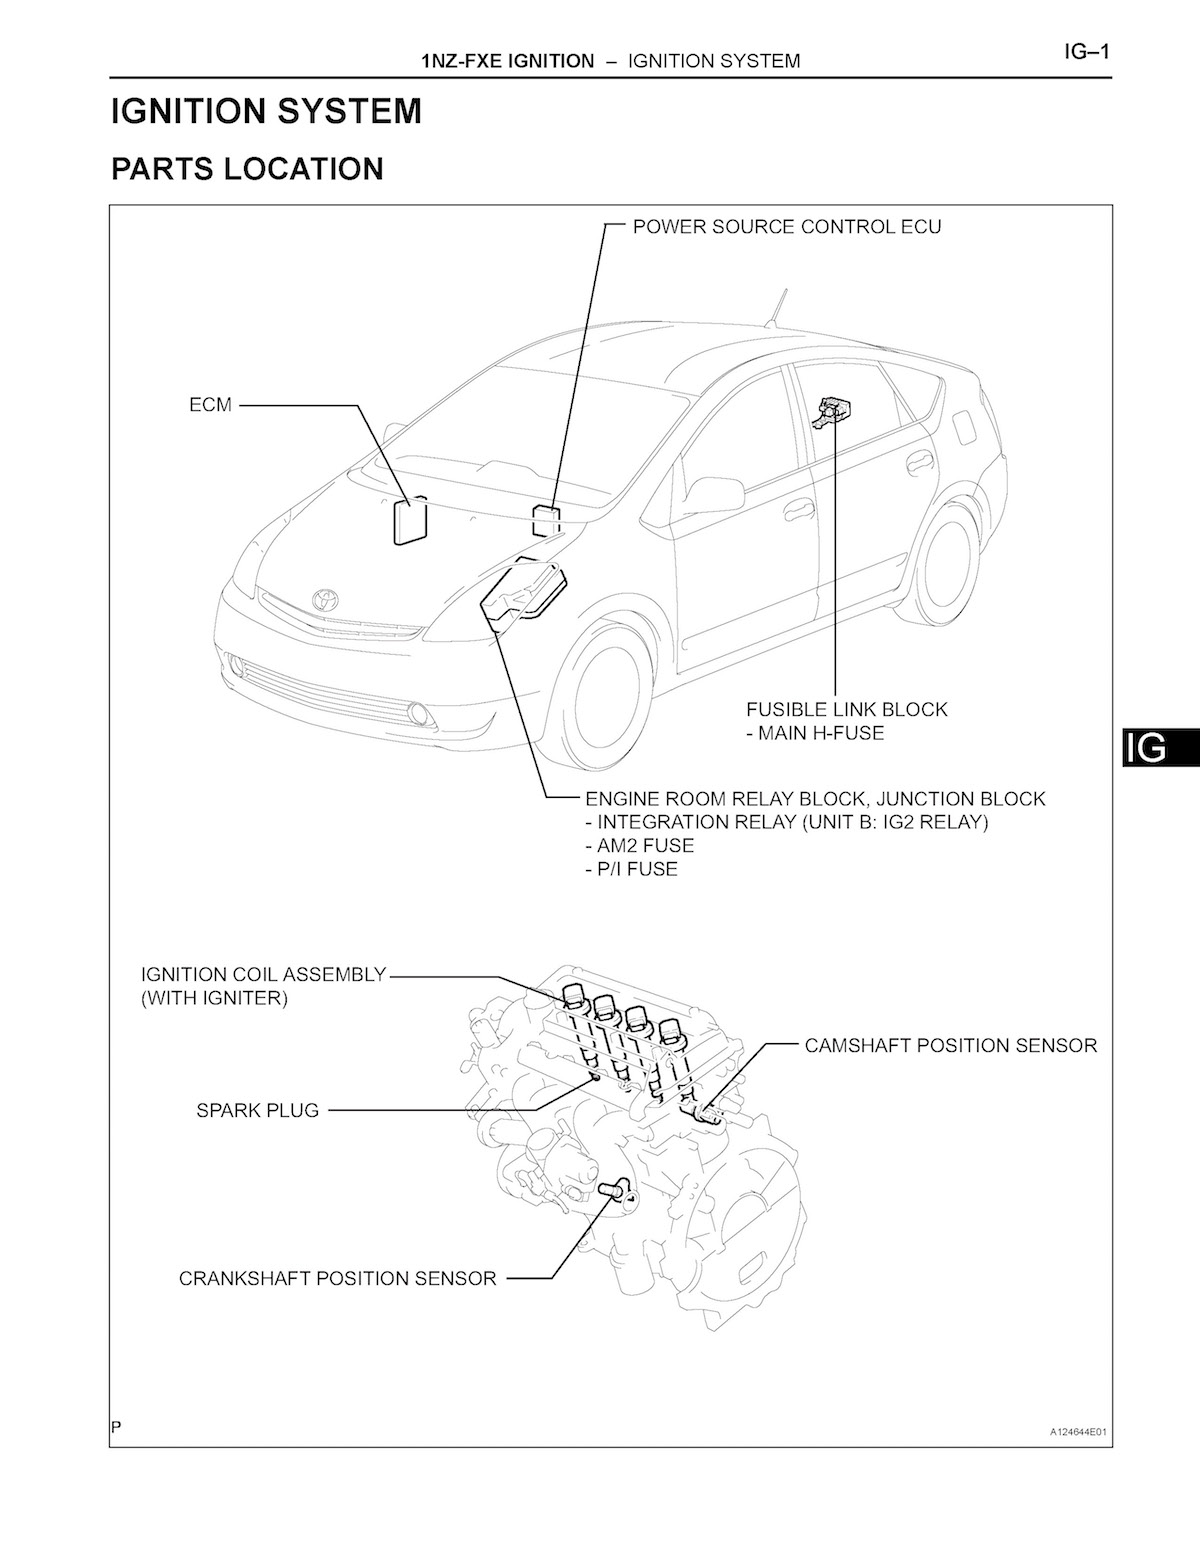 2006 Toyota Prius Repair Instruction Manual, 1NZ-FXE Ignition System